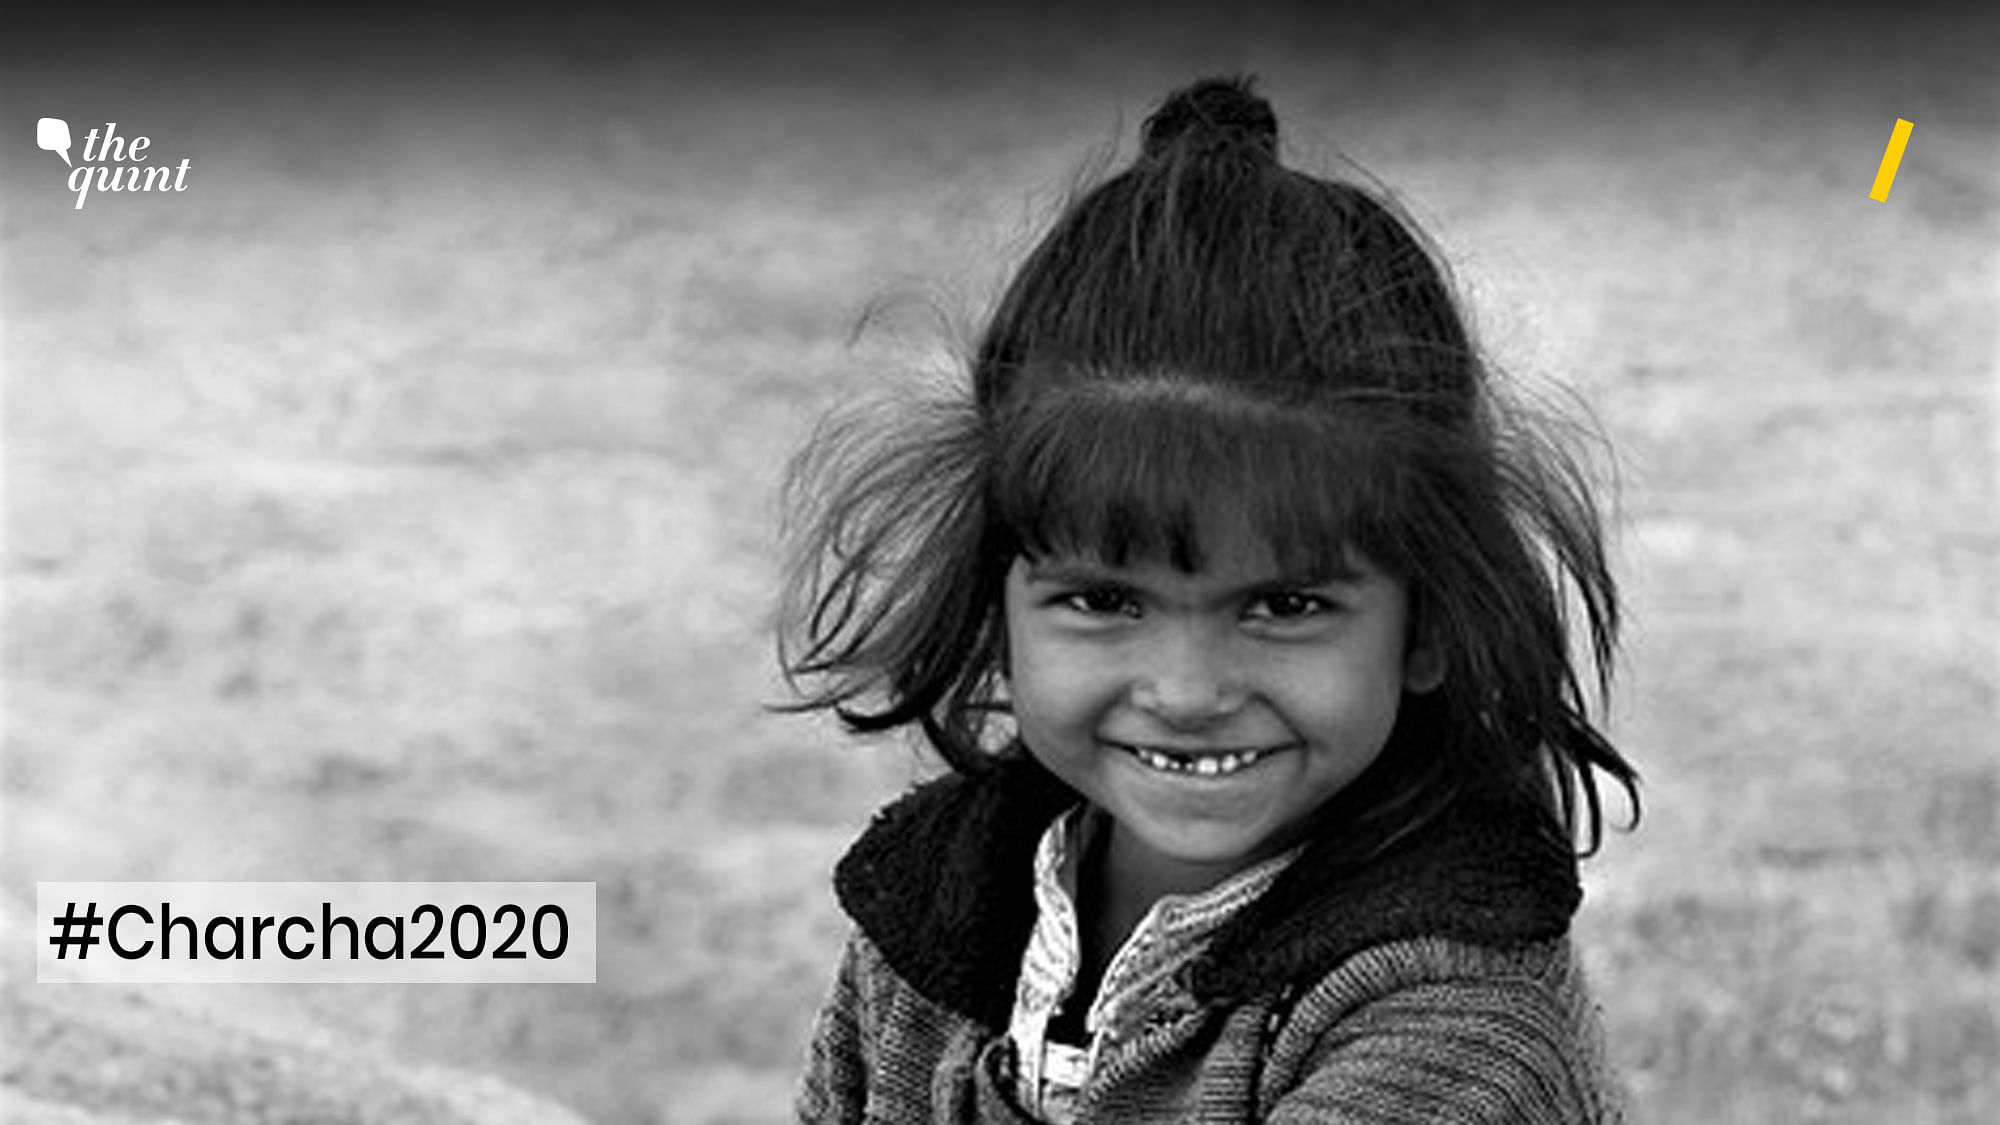 From May 14 to 16, 2020, ‘#charcha2020’ will host nine plenary sessions and 16 parallel events to cover the broad range of topics in the development sector.